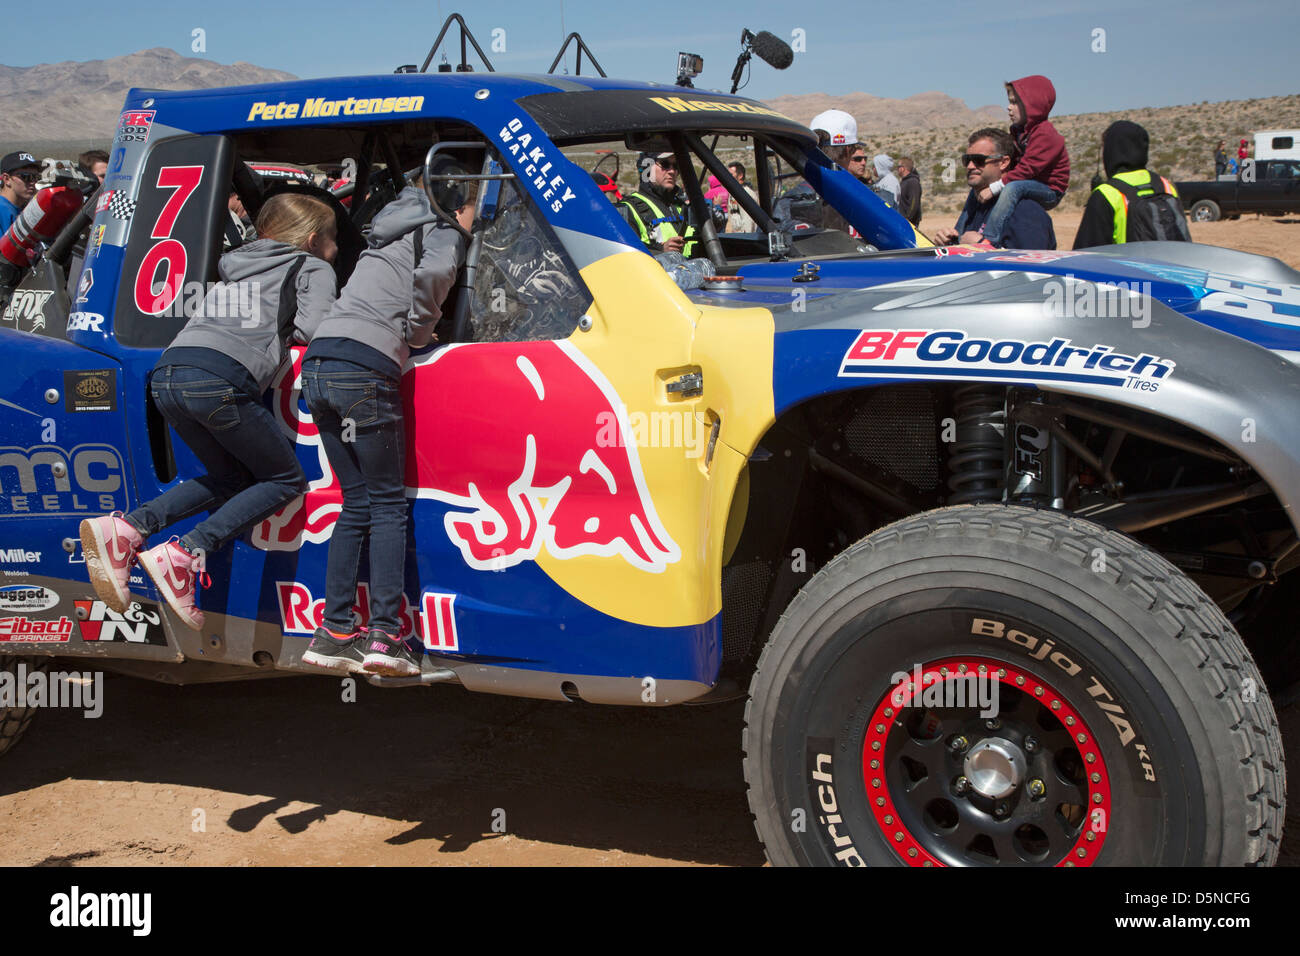 Two girls inspect the cab of a race car before the start of the Mint 400 off-road auto race through the Mojave Desert Stock Photo